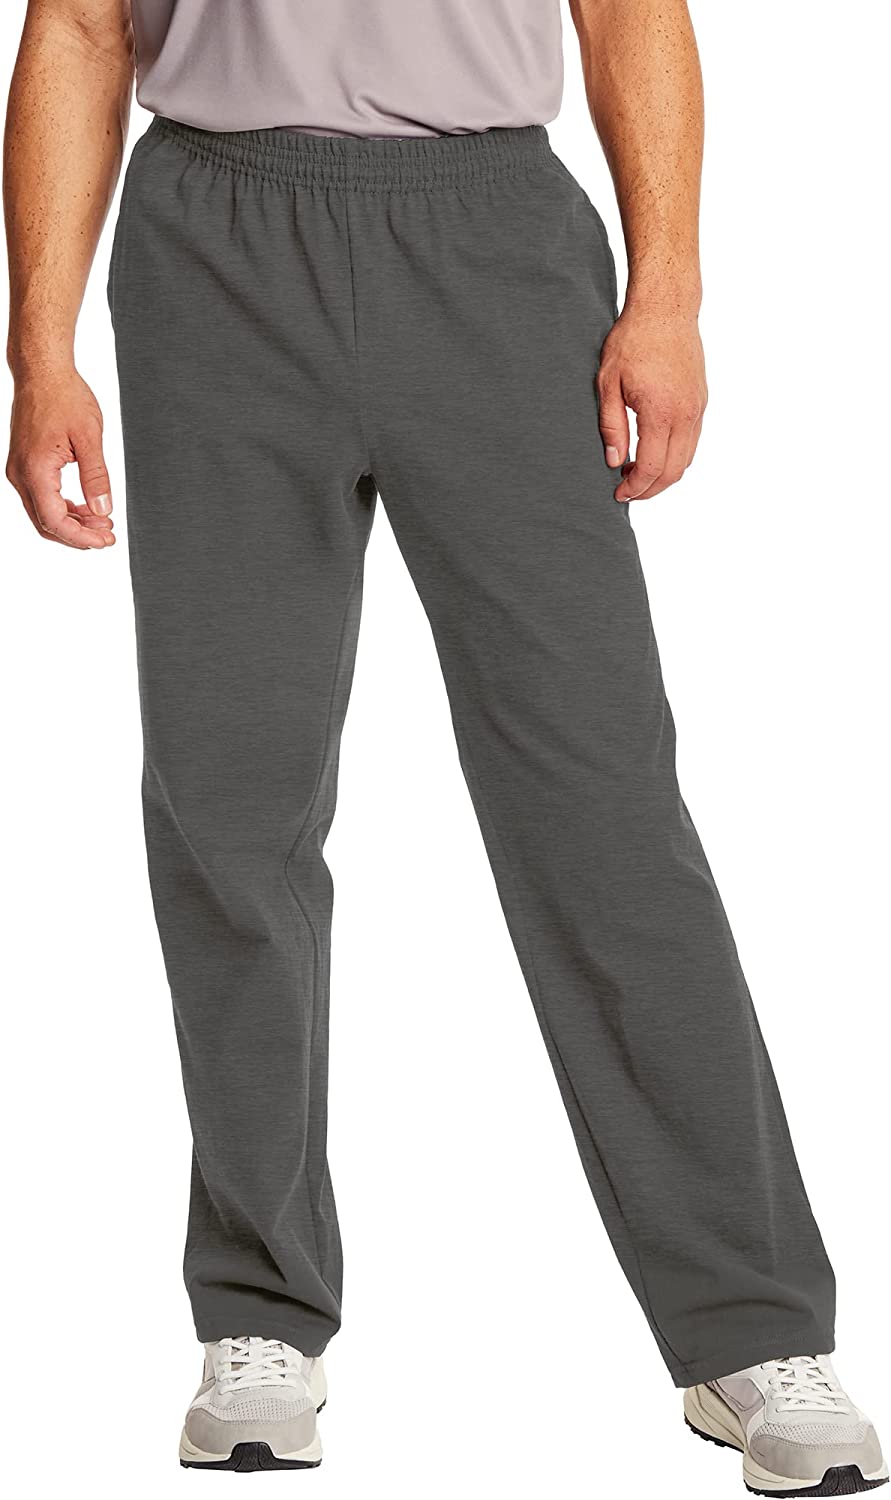 Hanes Mens Performance Sleep Lounge Pant - Sizes S - 2XL - 3 Color Choices  | eBay